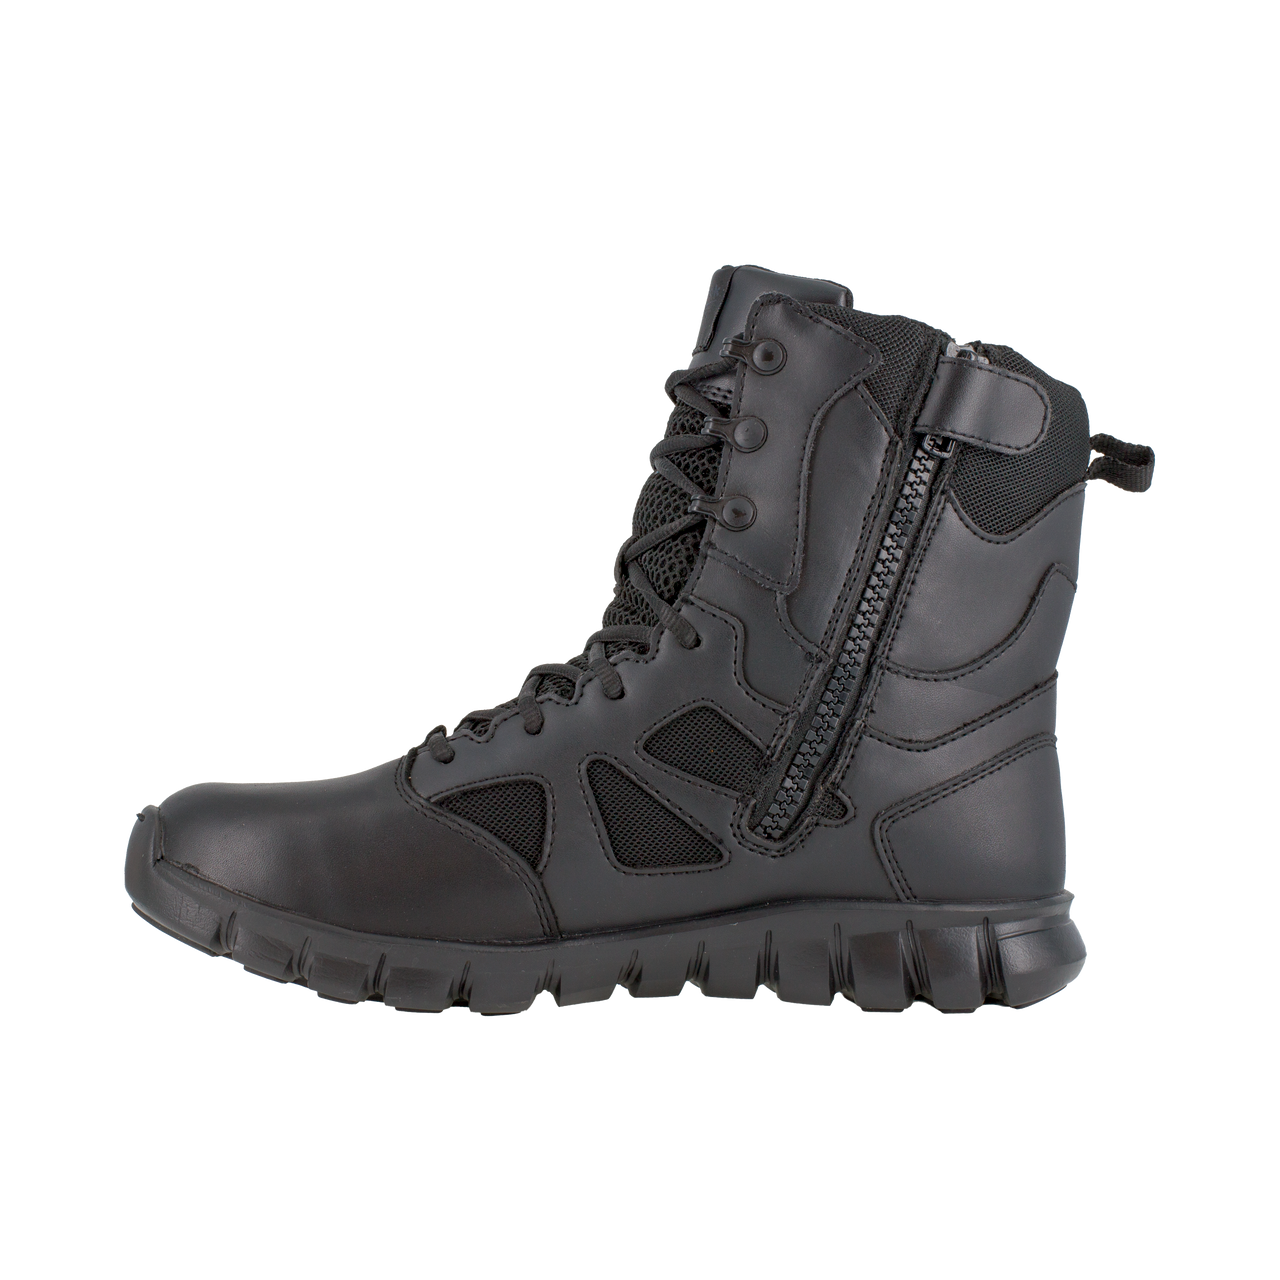 Reebok Sublite Cushion 8" Tactical Waterproof Boots with Side Zipper - RB8806